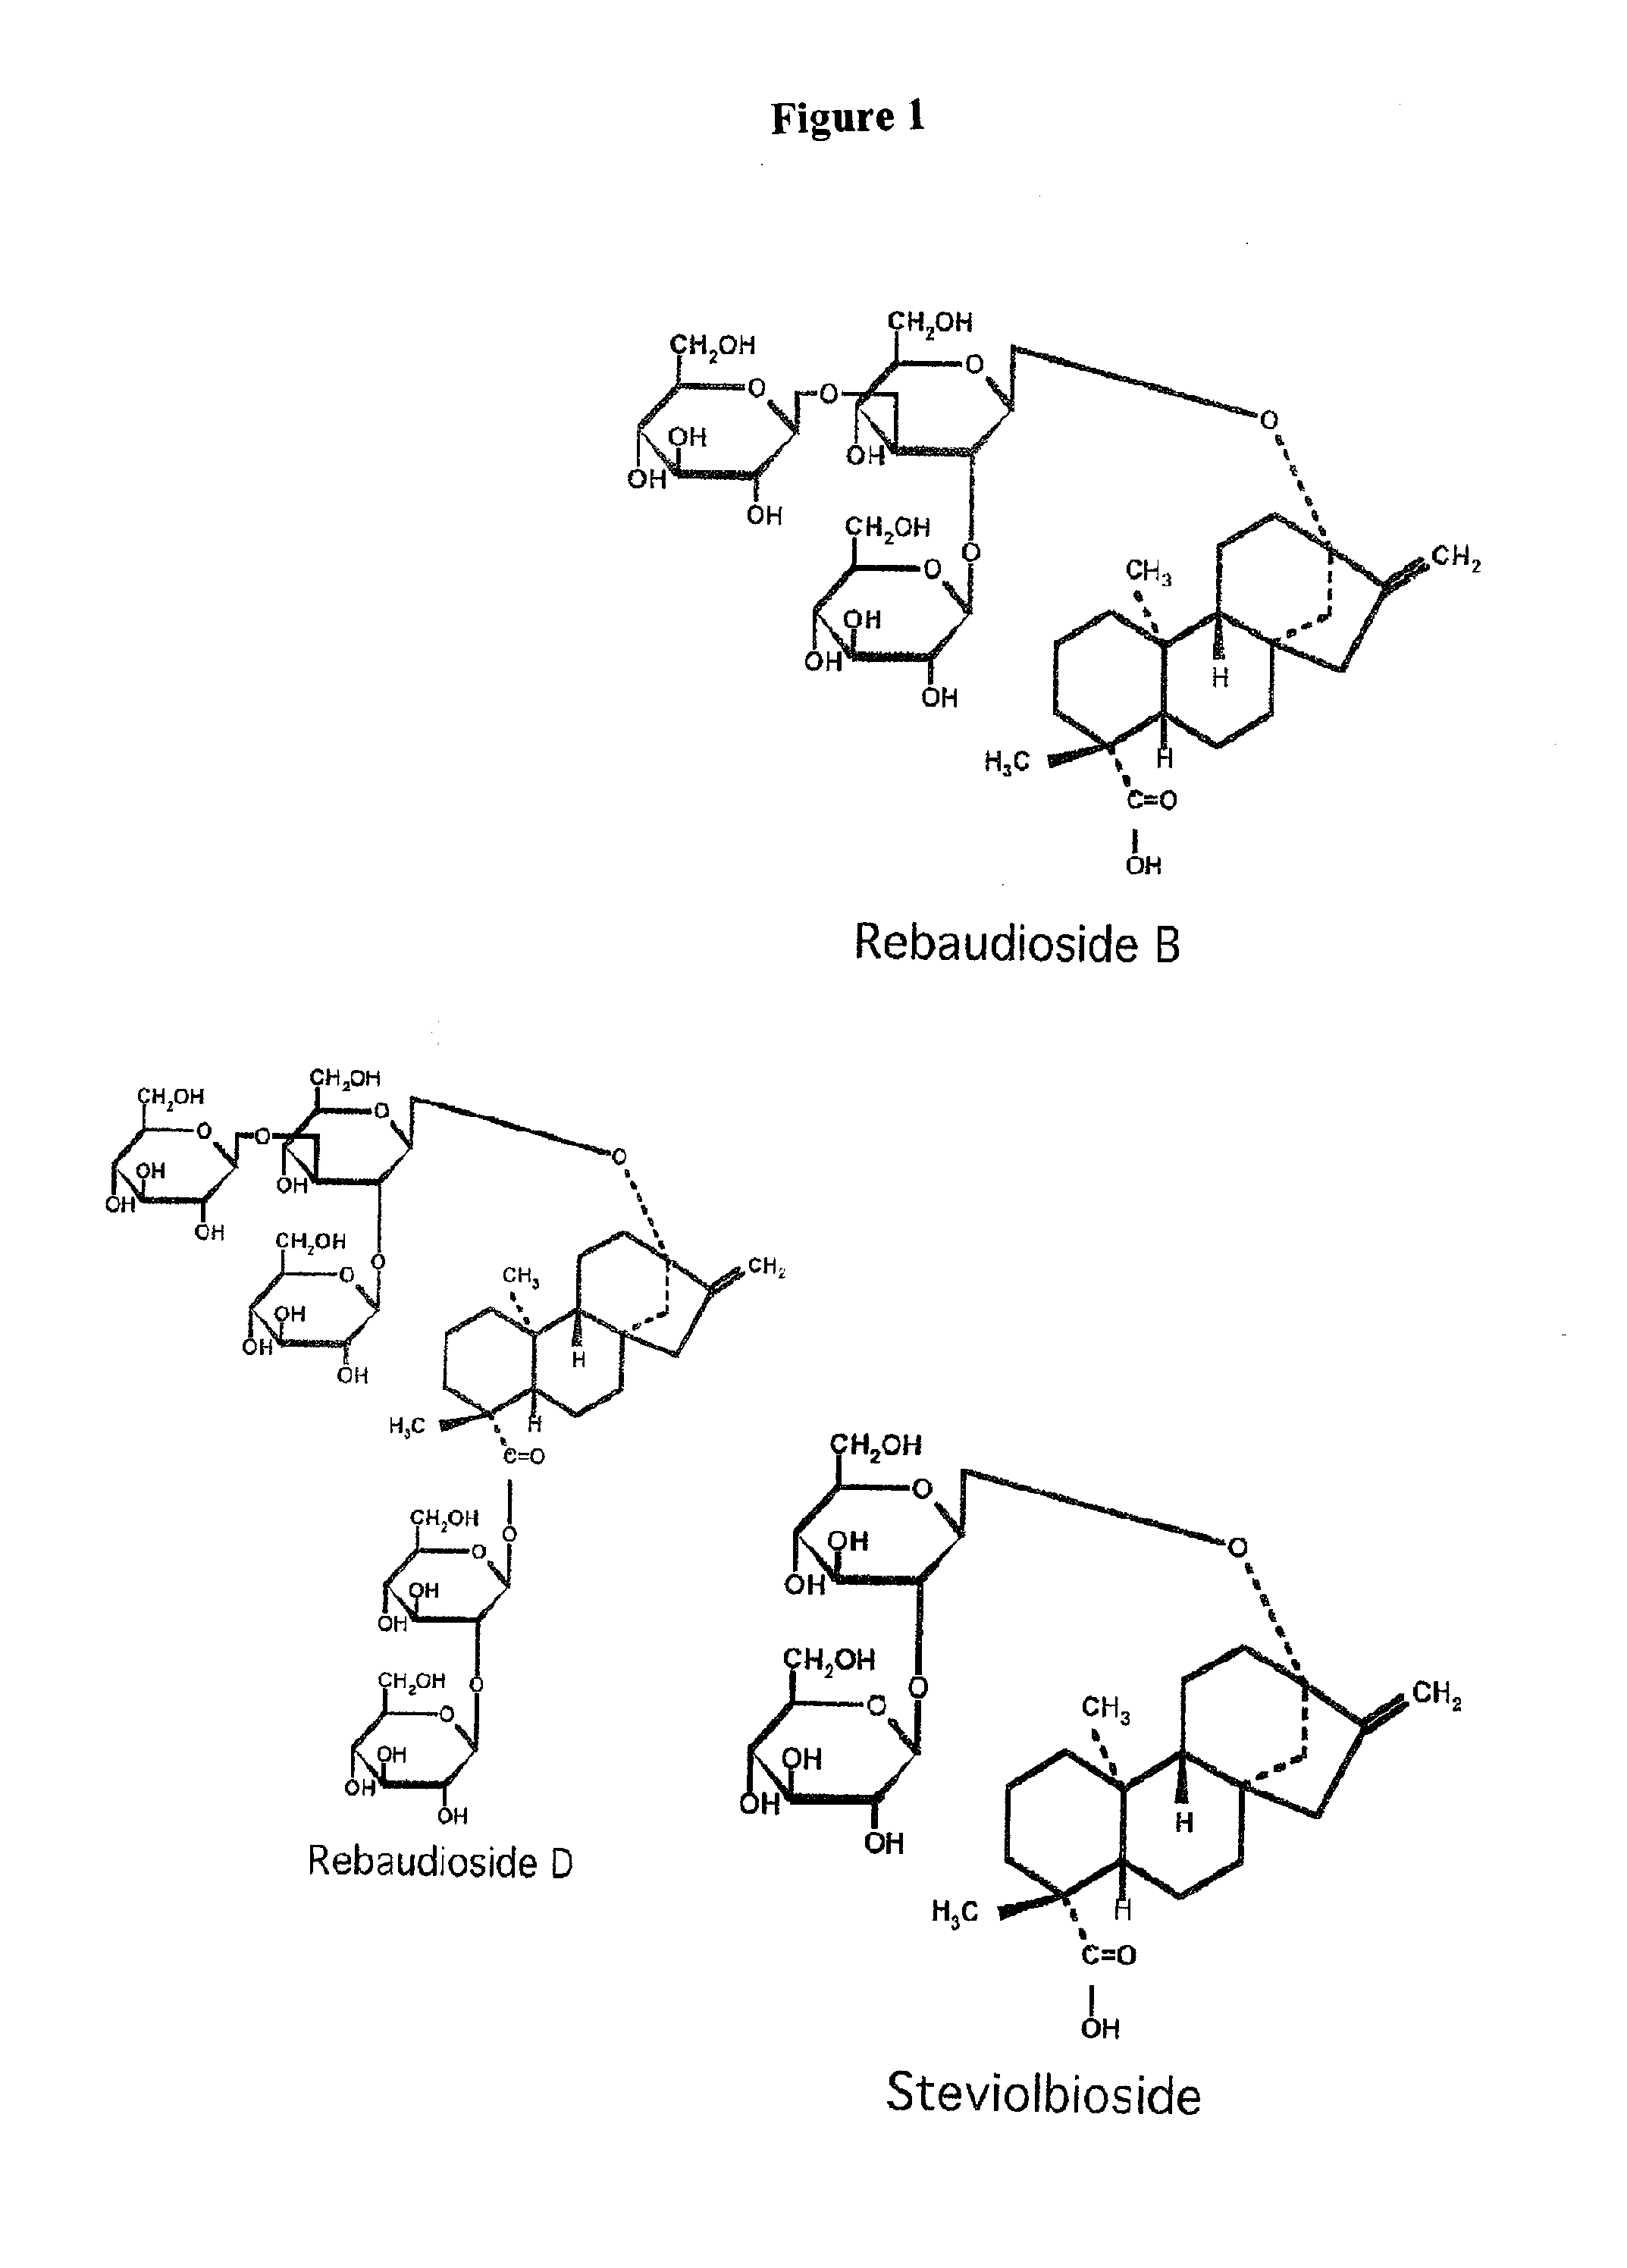 Processes of Purifying Steviol Glycosides